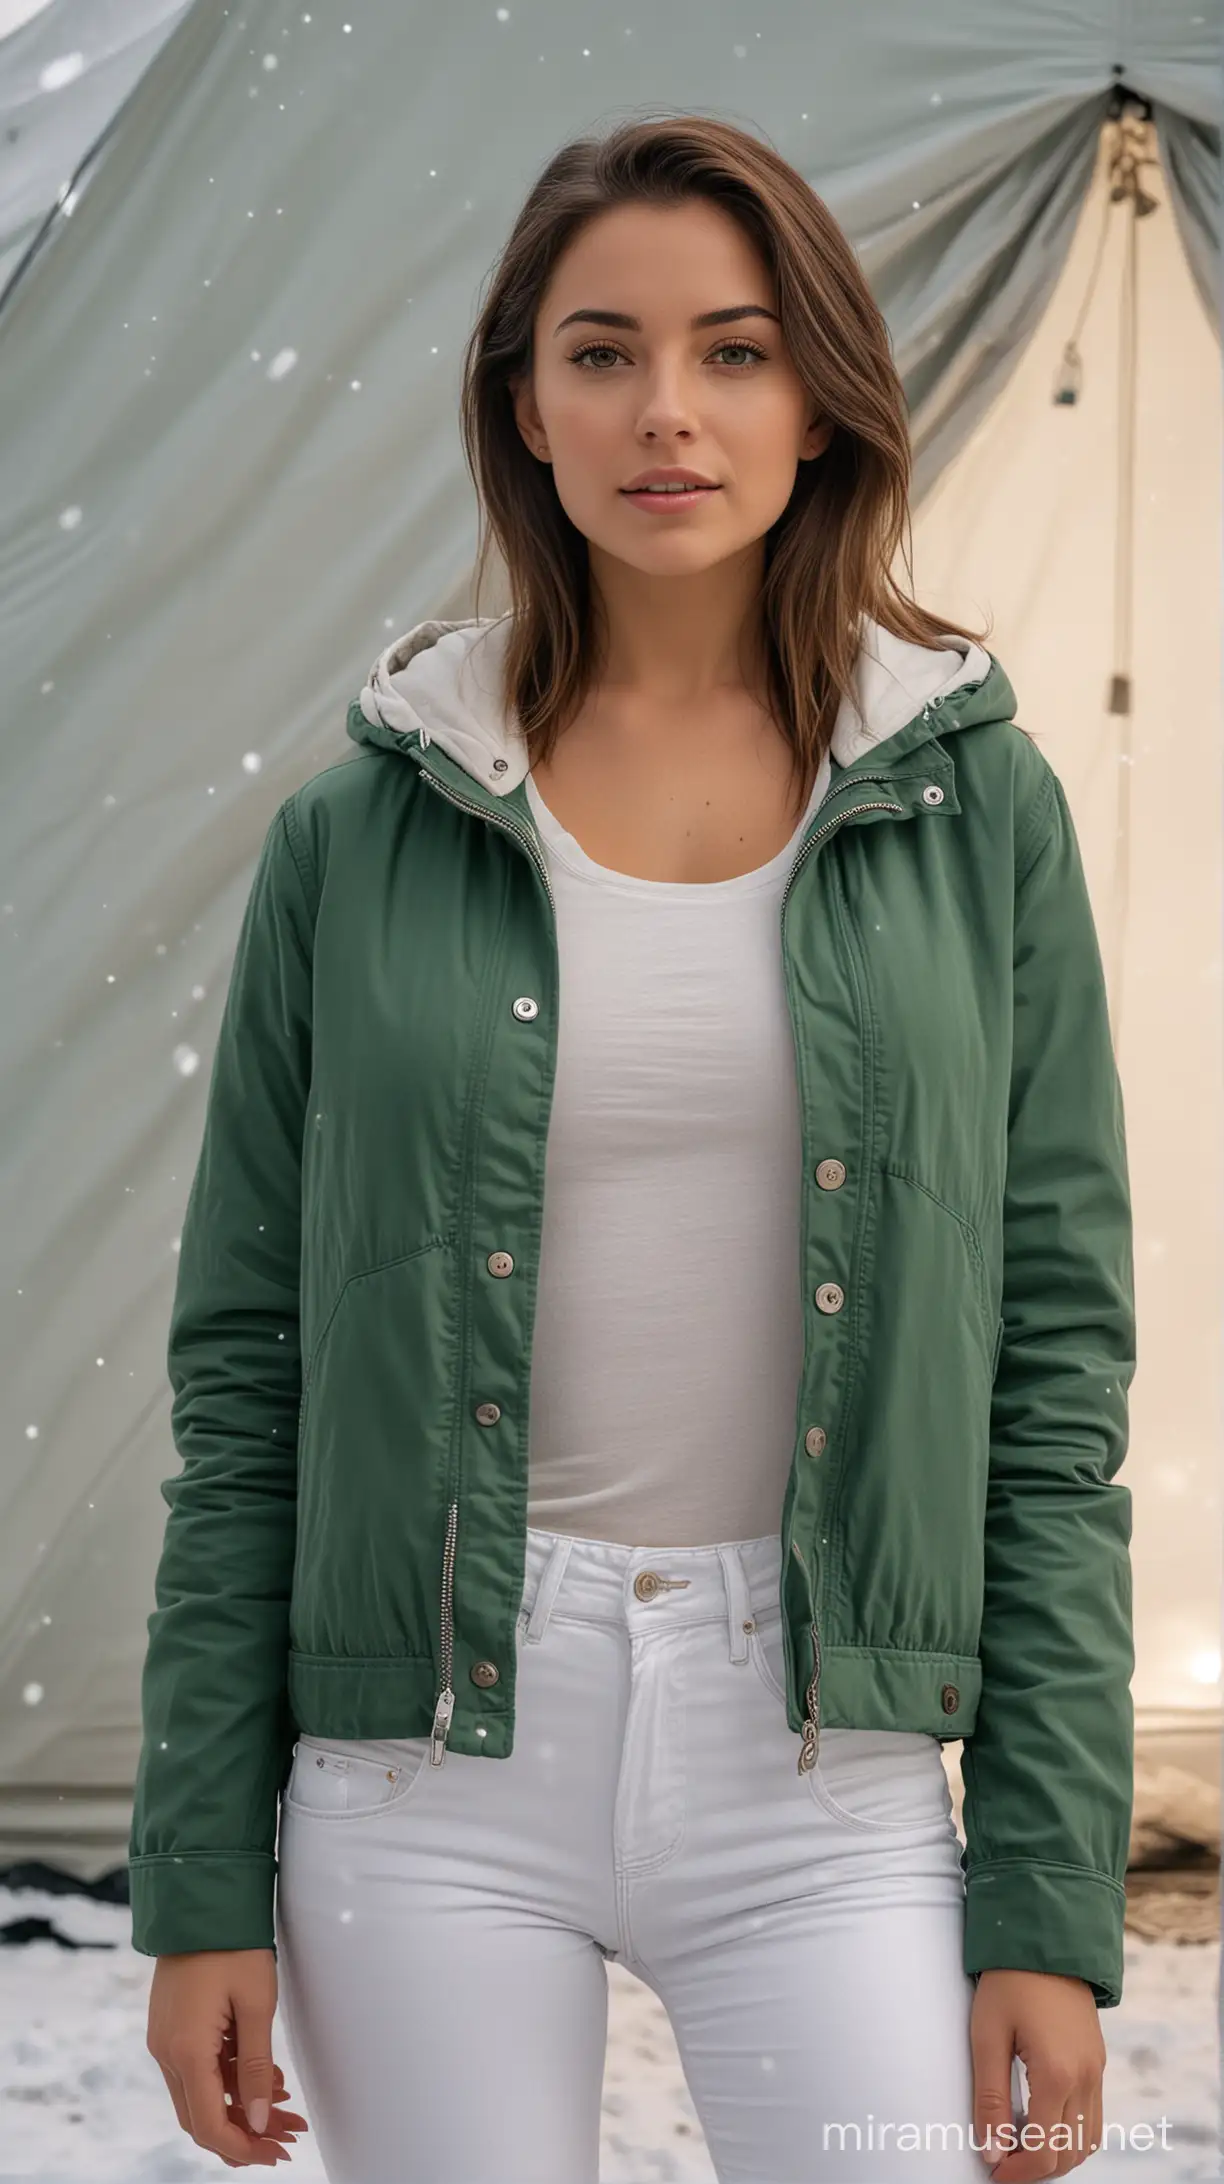 Stylish American Girl in Snow Tent with White Jeans and Green Jacket